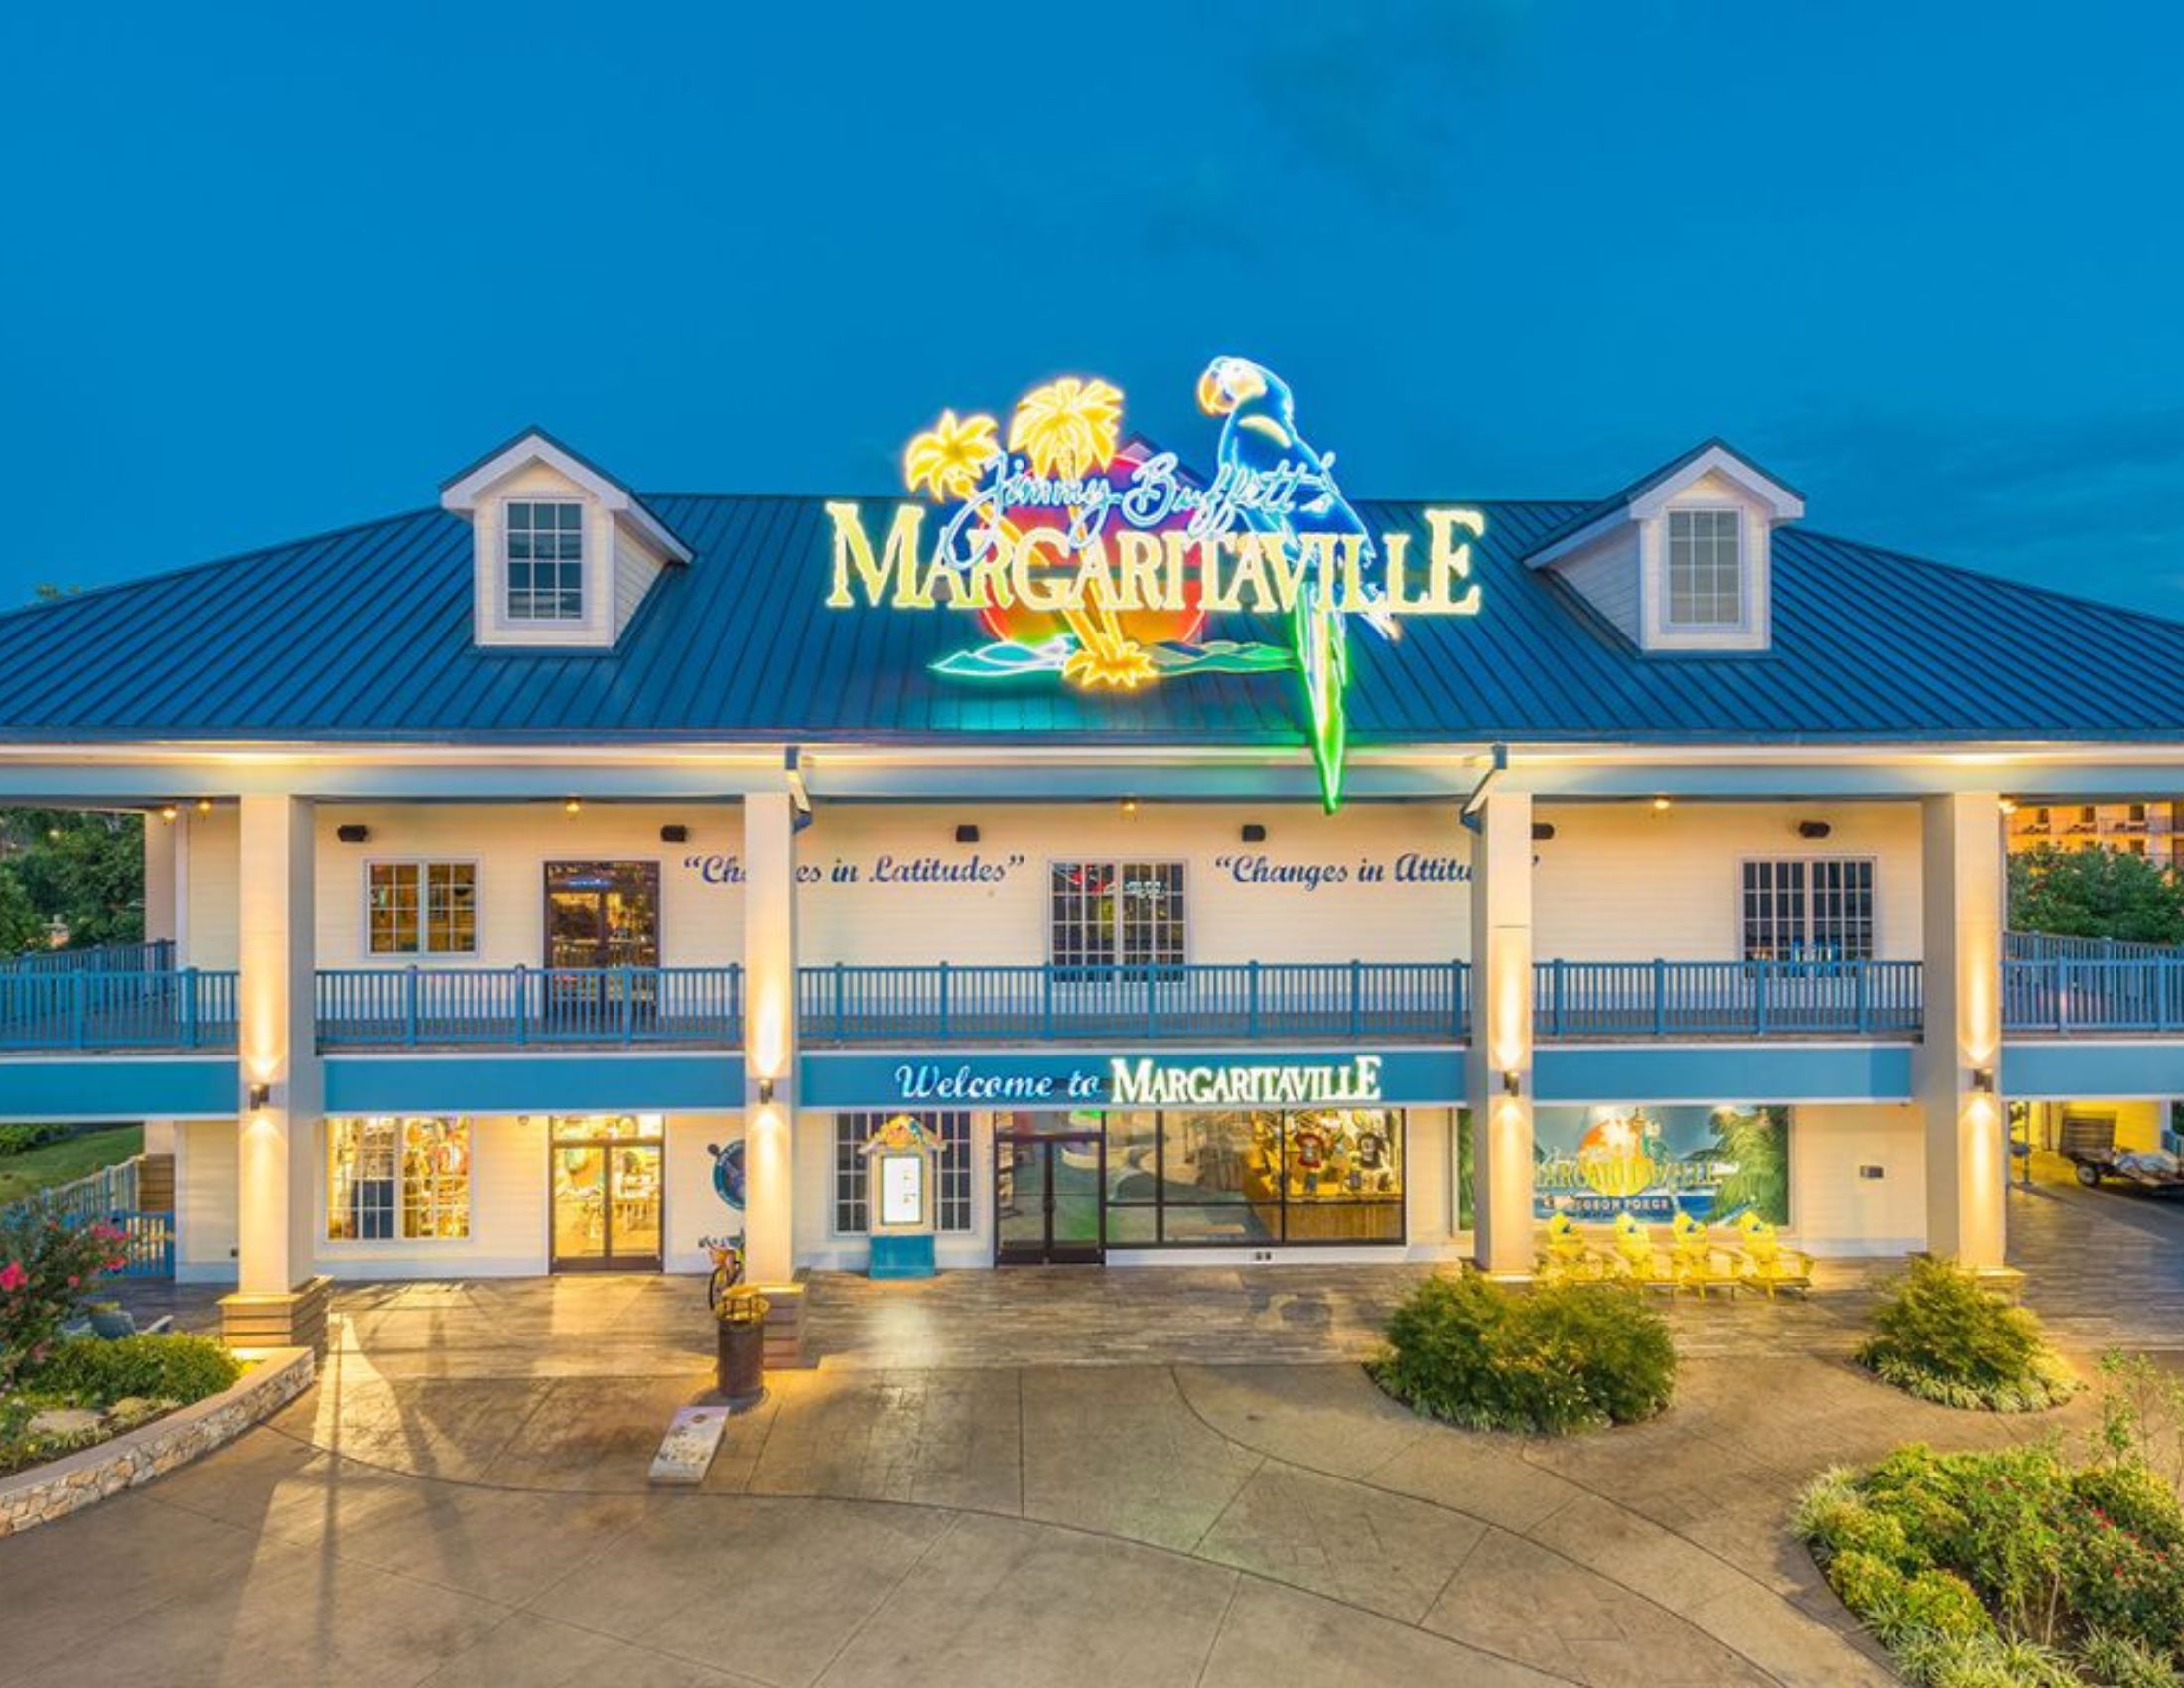 Margaritaville in Pigeon Forge